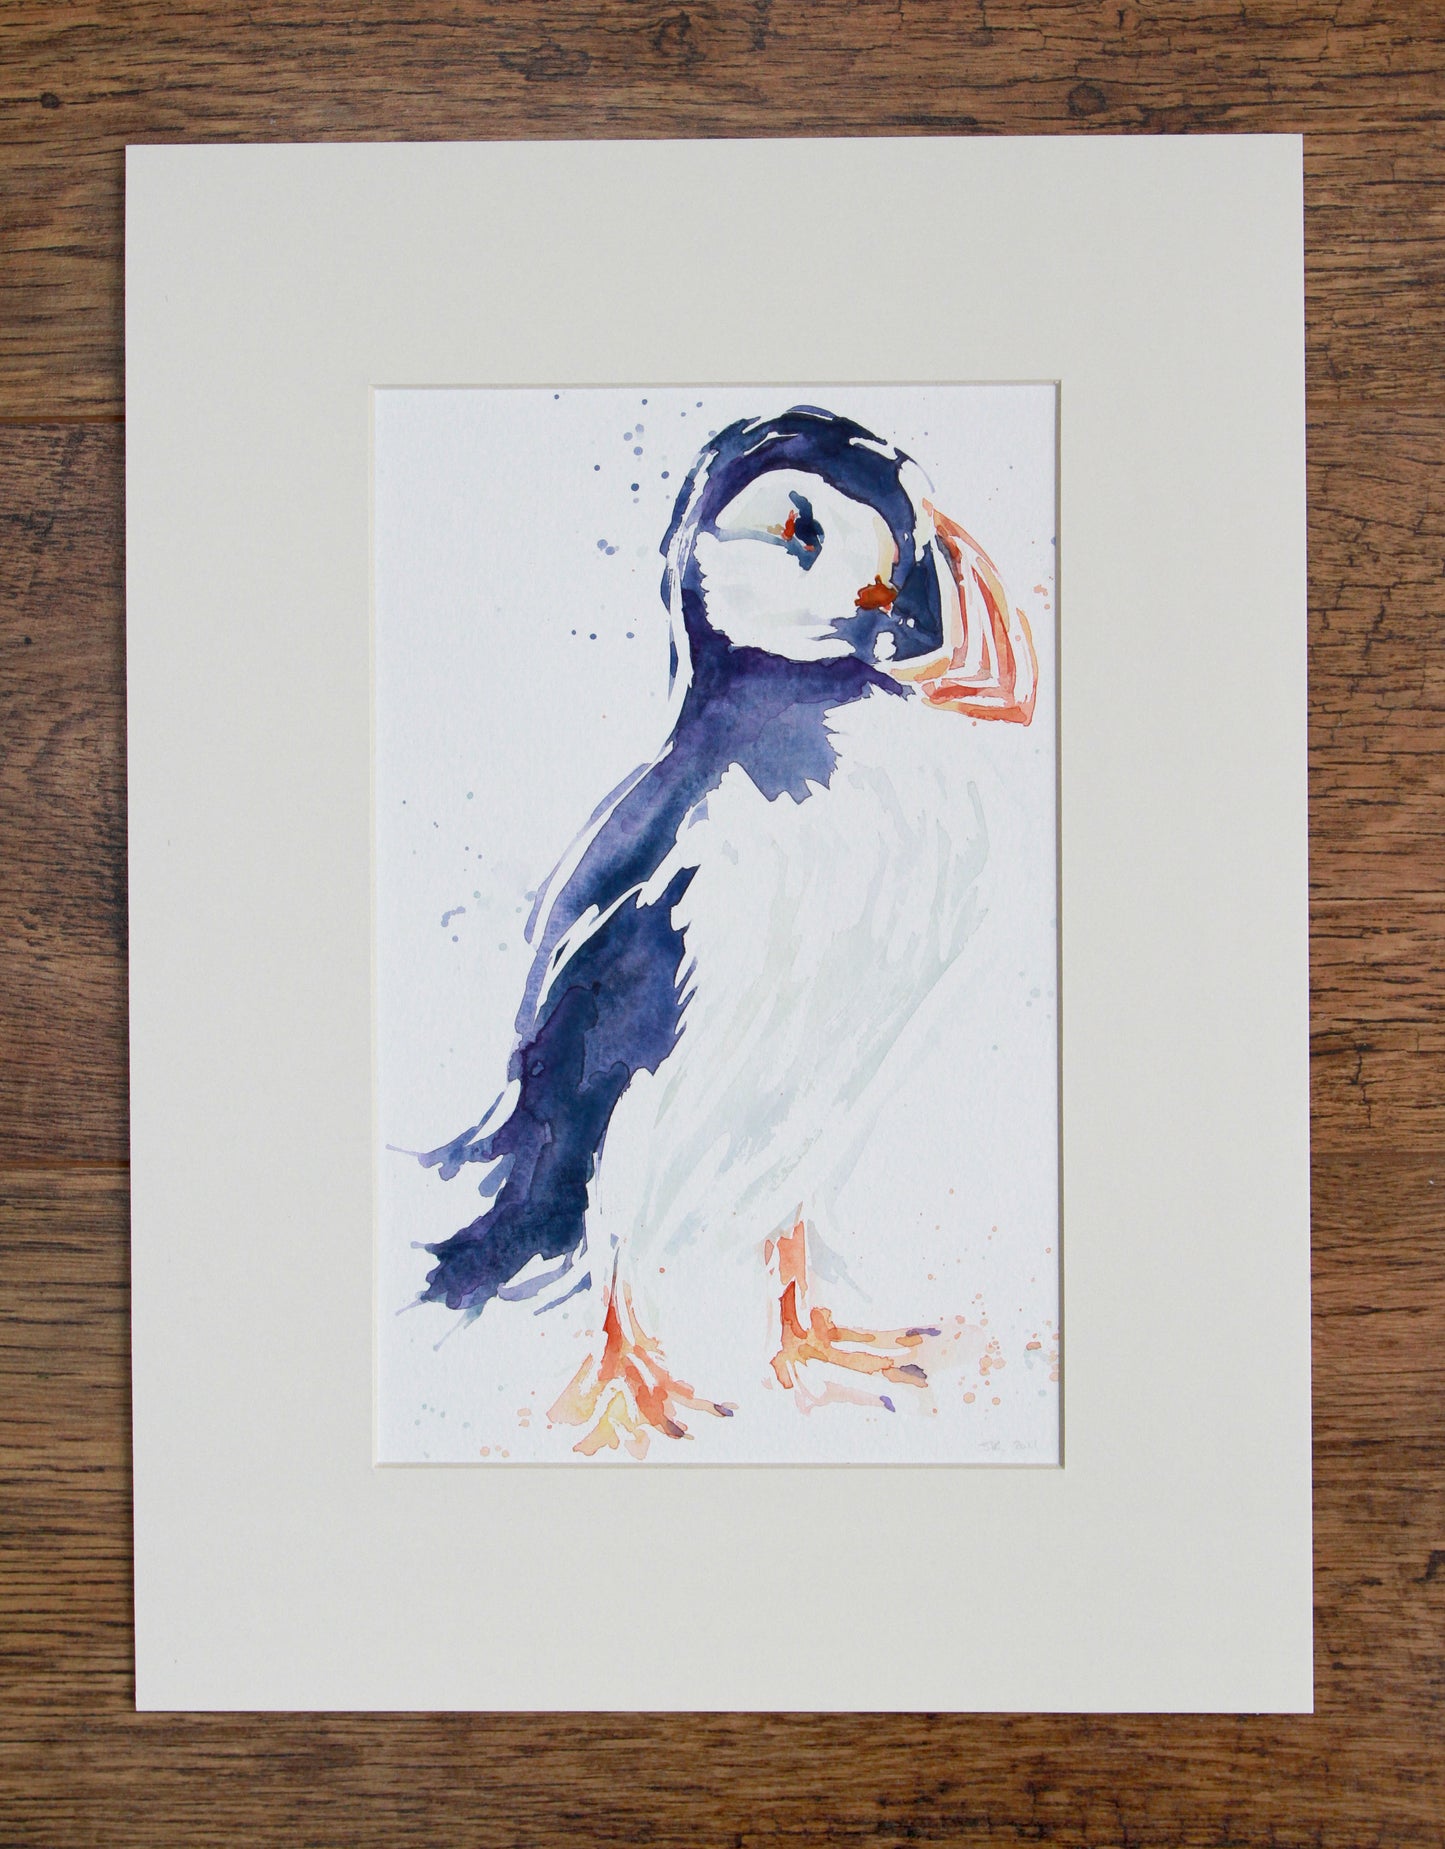 PUFFIN #6 Large watercolour painting